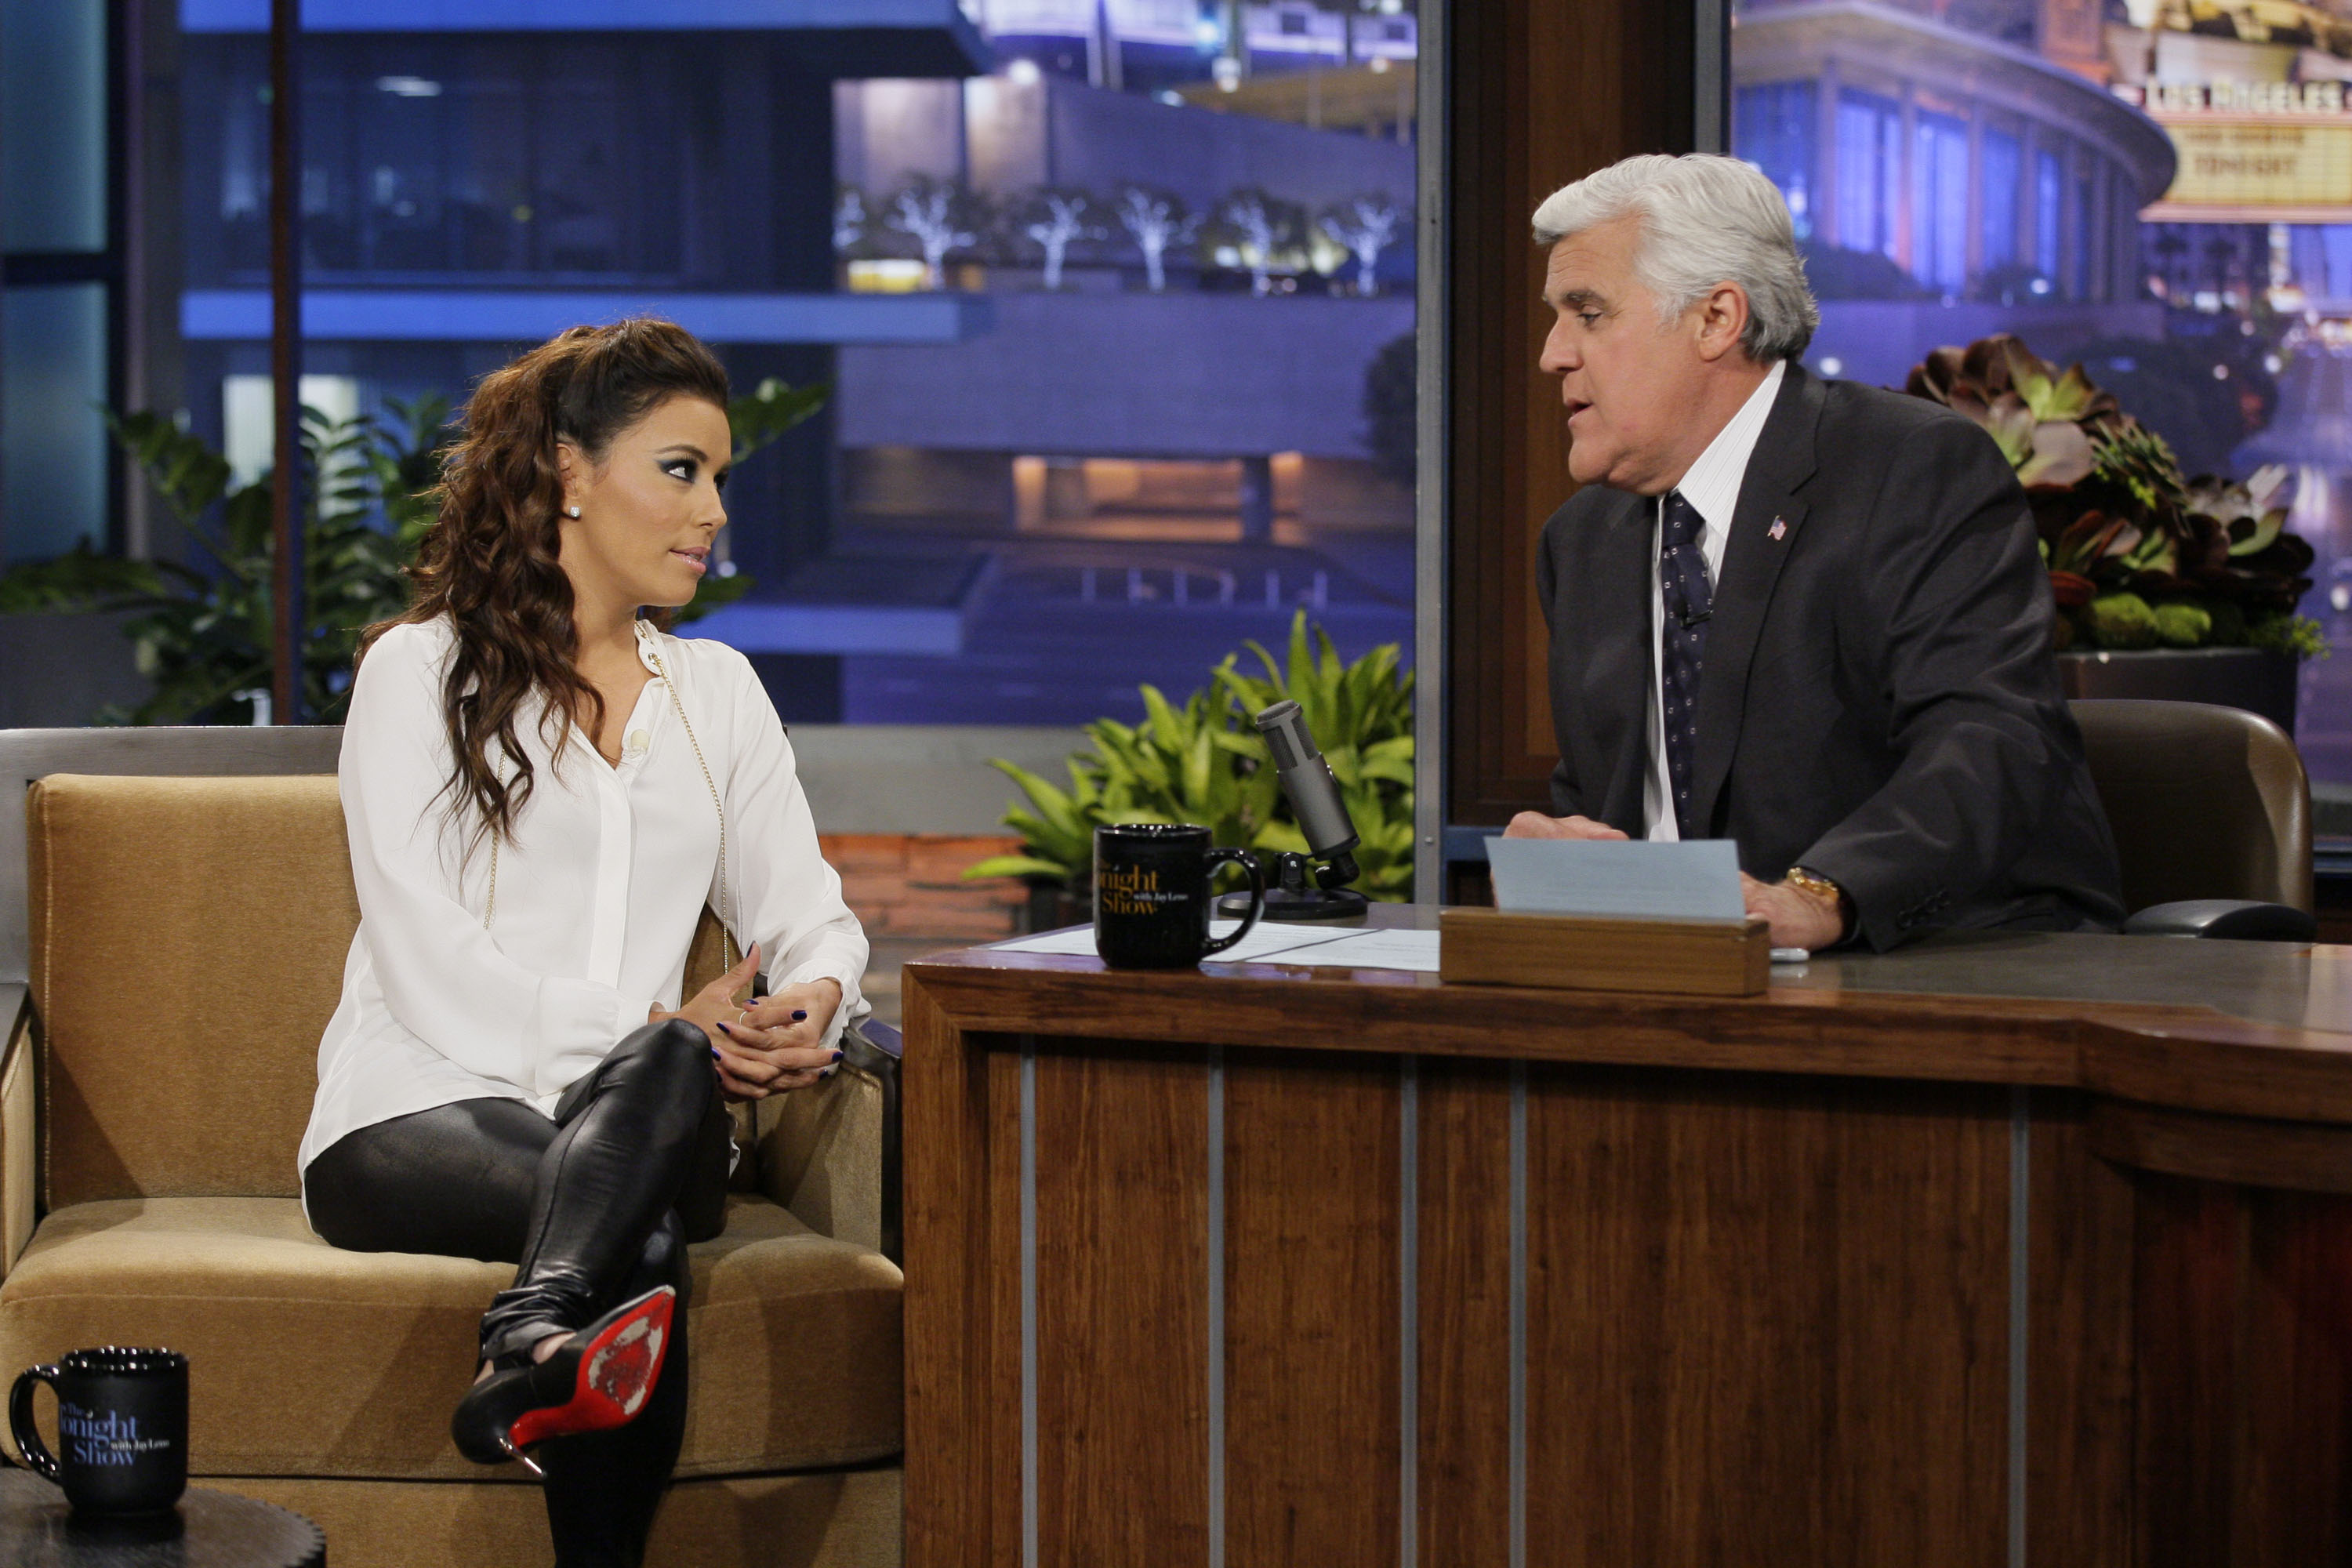 Eva Longoria on "The Tonight Show with Jay Leno" in 2013 | Source: Getty Images